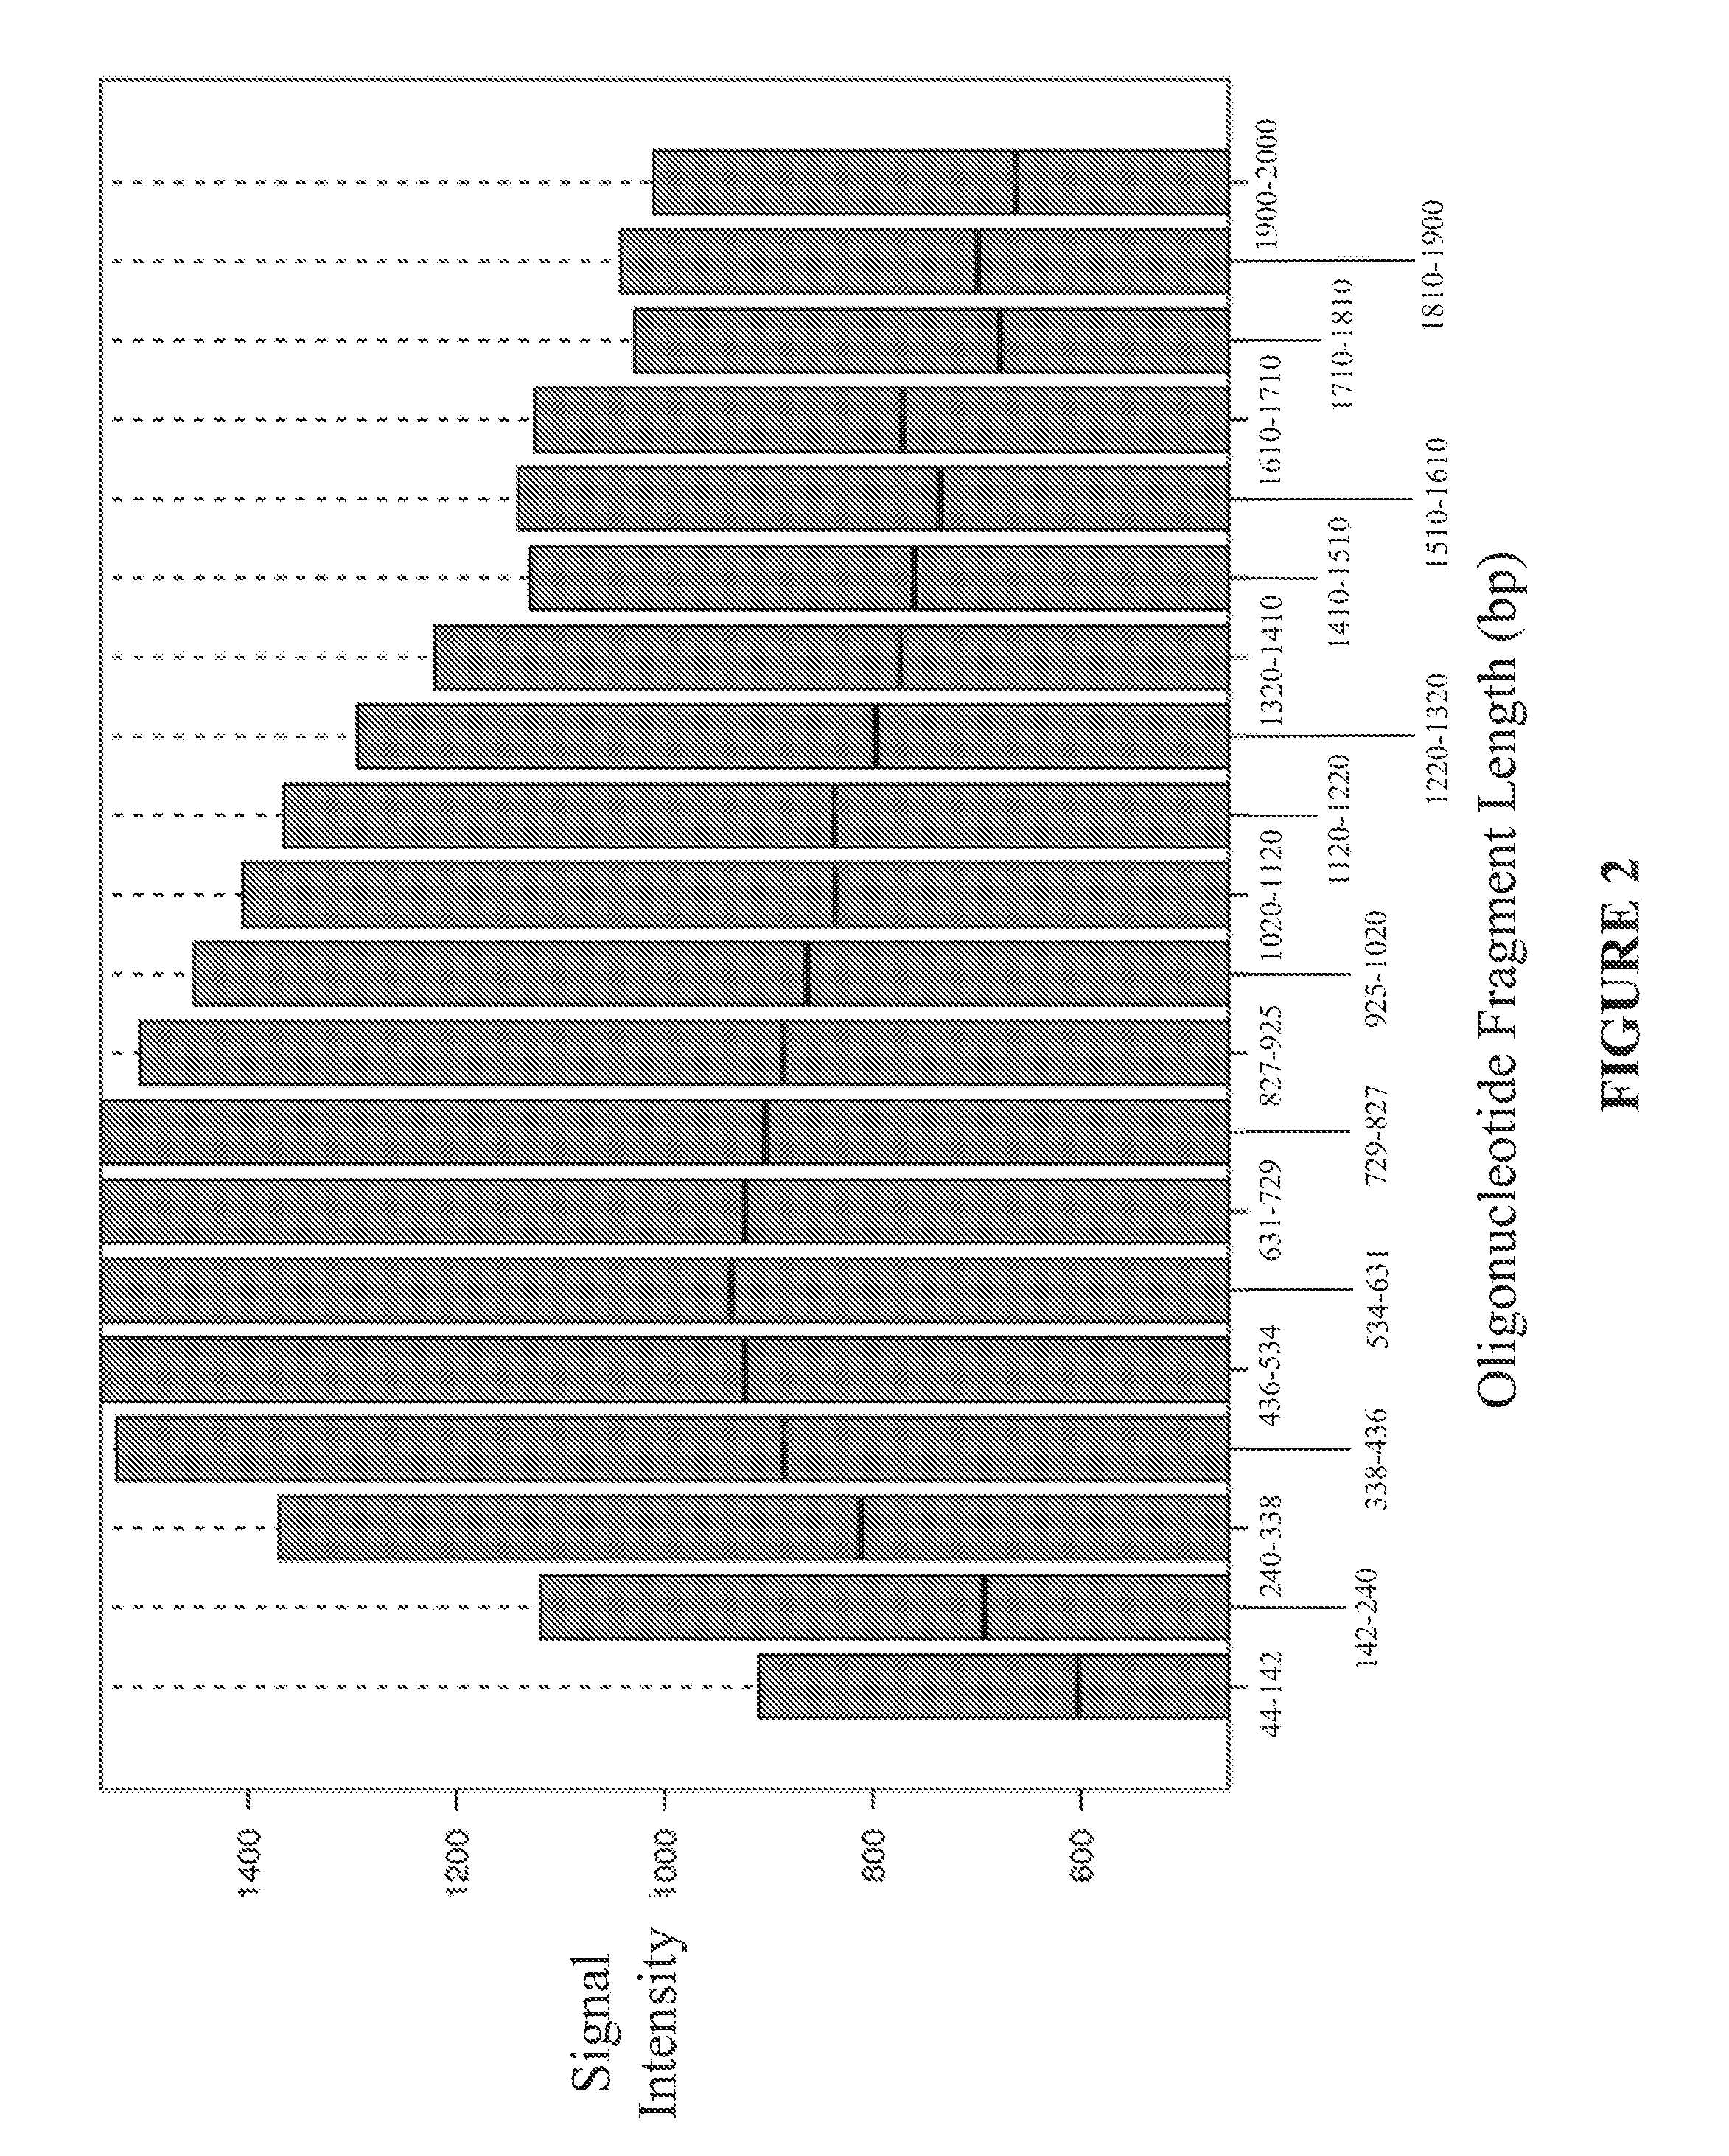 Analysis of Data Obtained from Microarrays